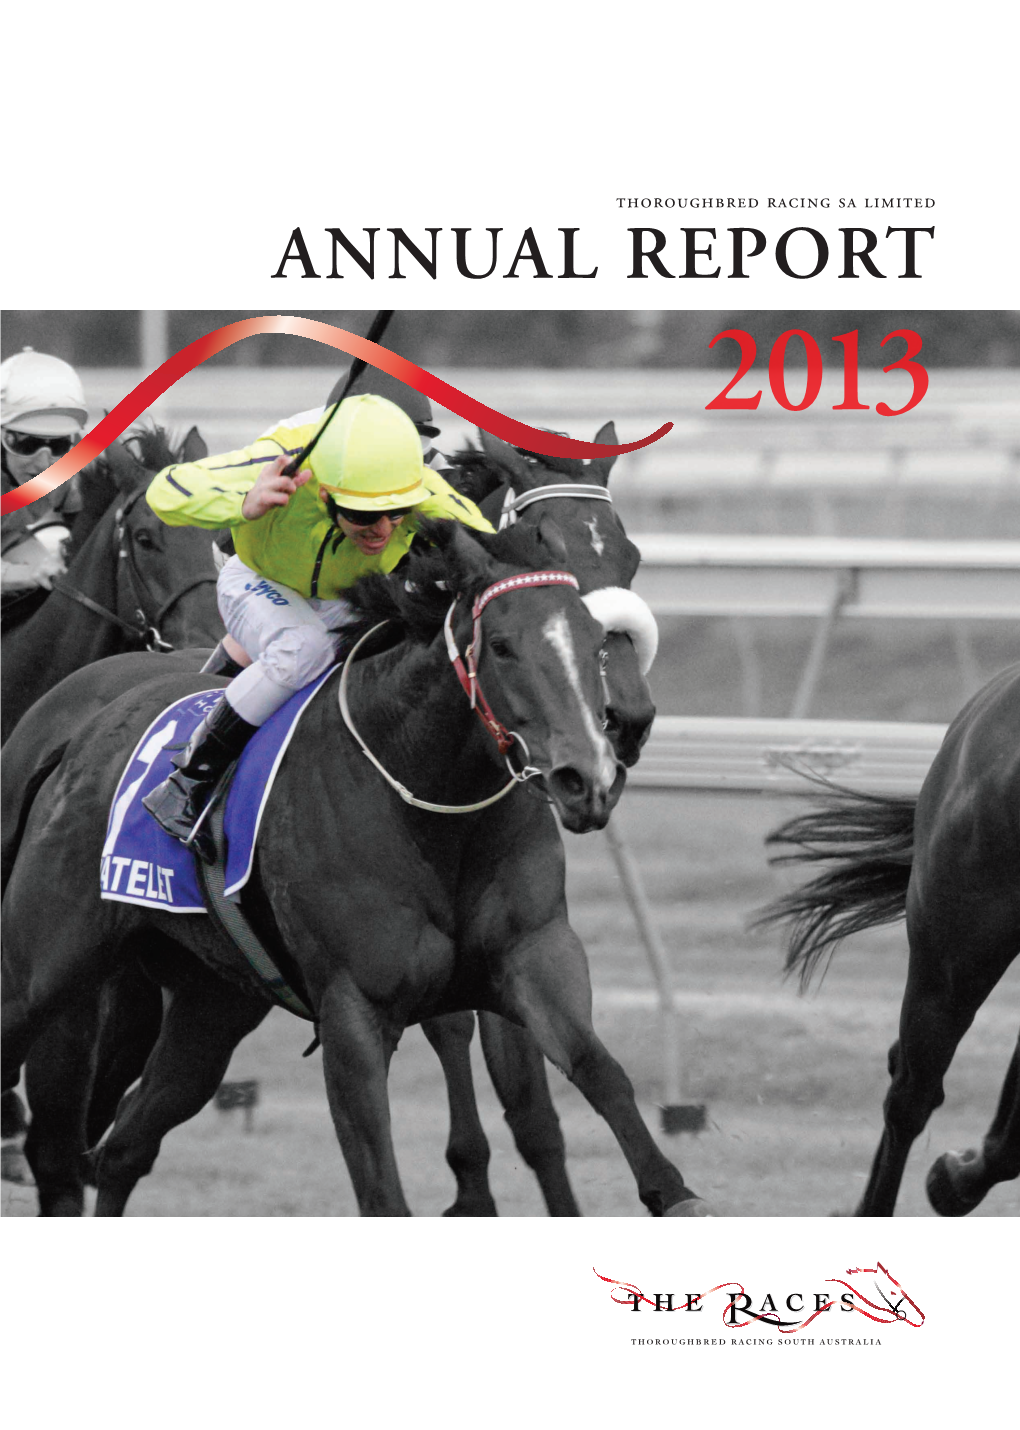 ANNUAL REPORT 2013 Thoroughbred Racing Sa Limited ANNUAL REPORT 2013